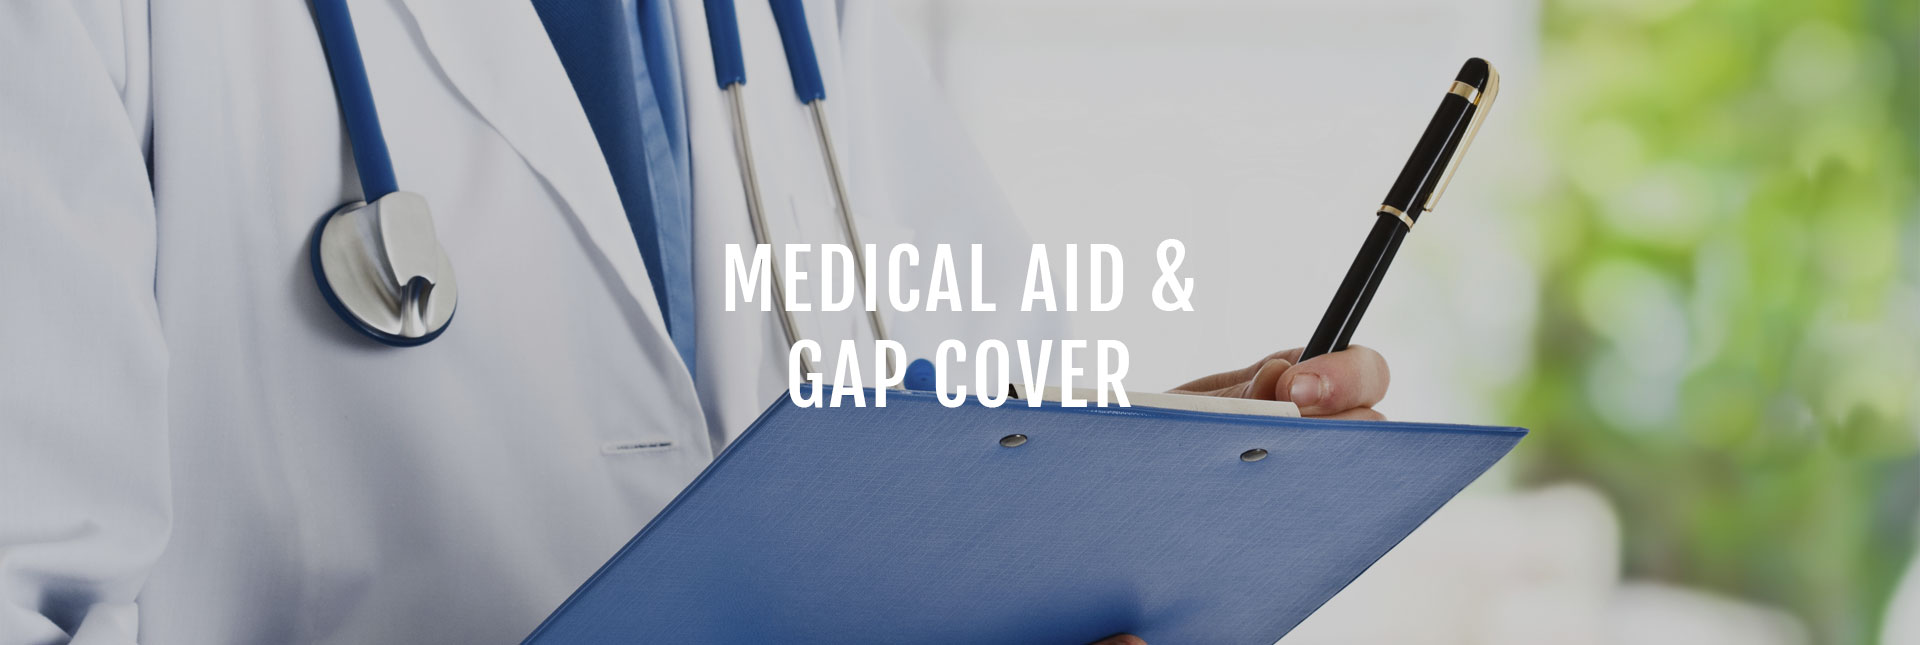 medical scheme, gap cover, medical aid, health care broker, medical aid quote, critical illness benefit, disability benefit